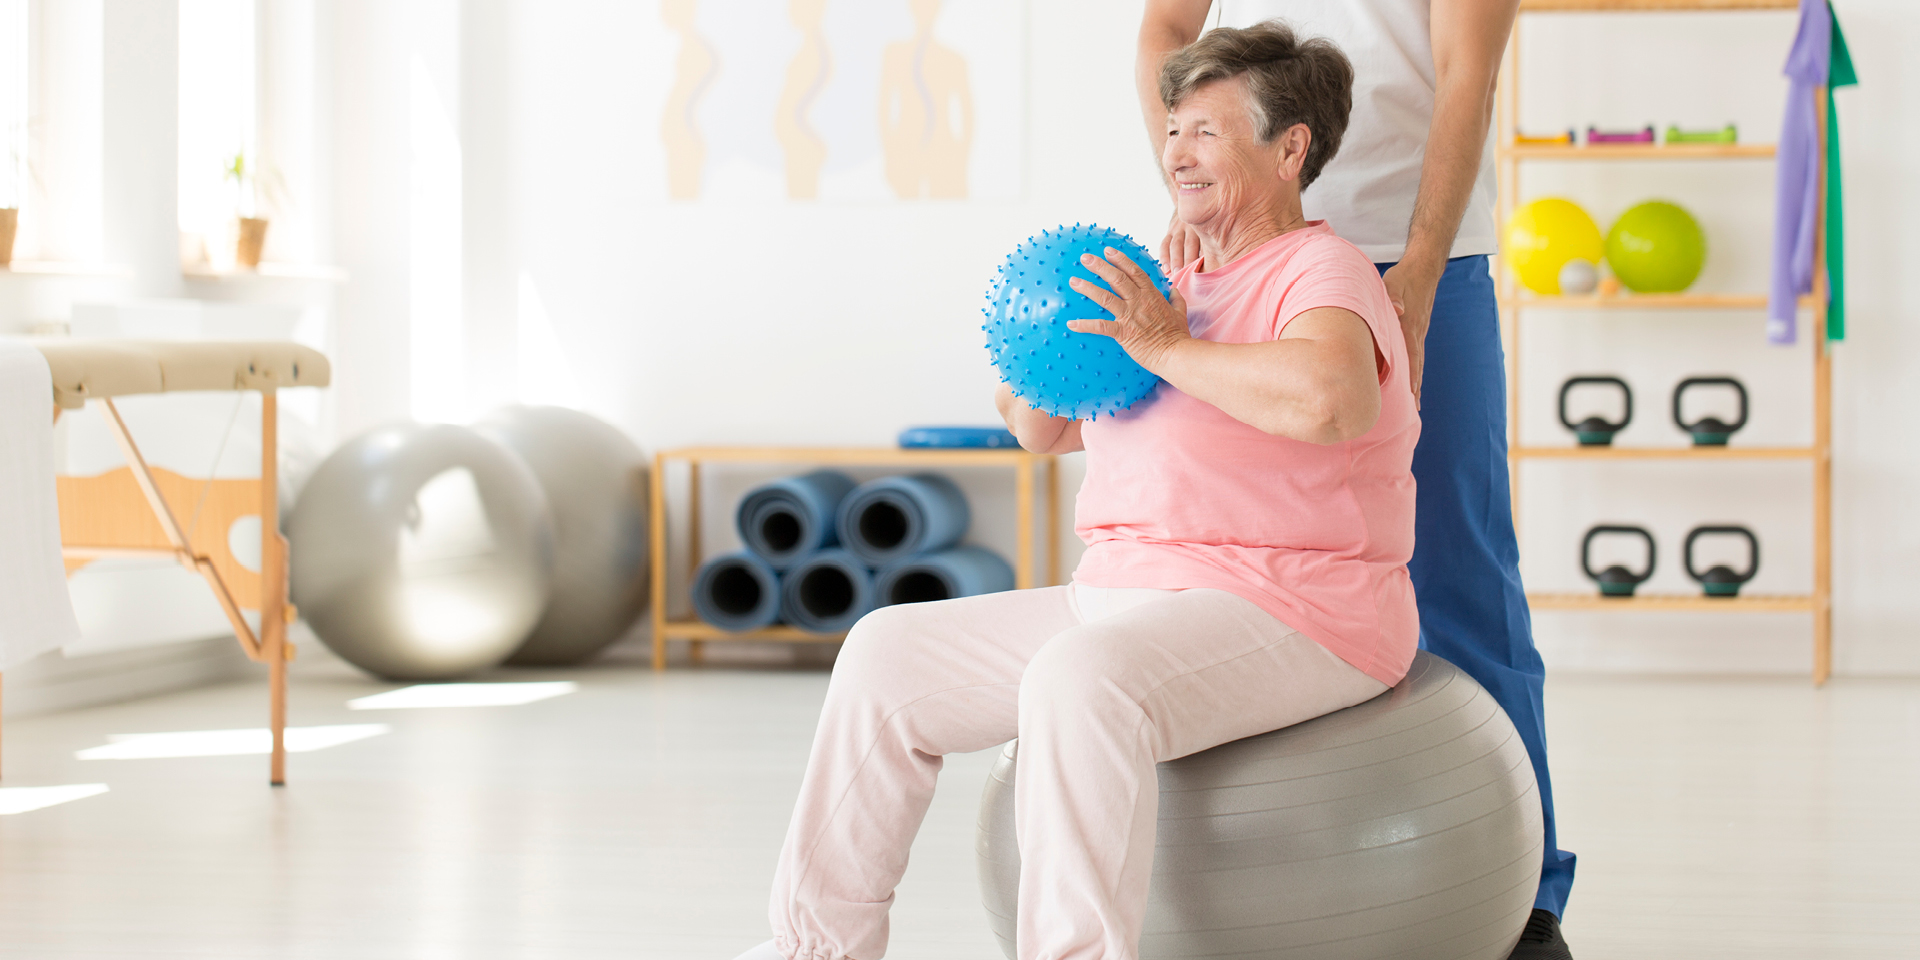 woman sitting on exercise ball with therapist